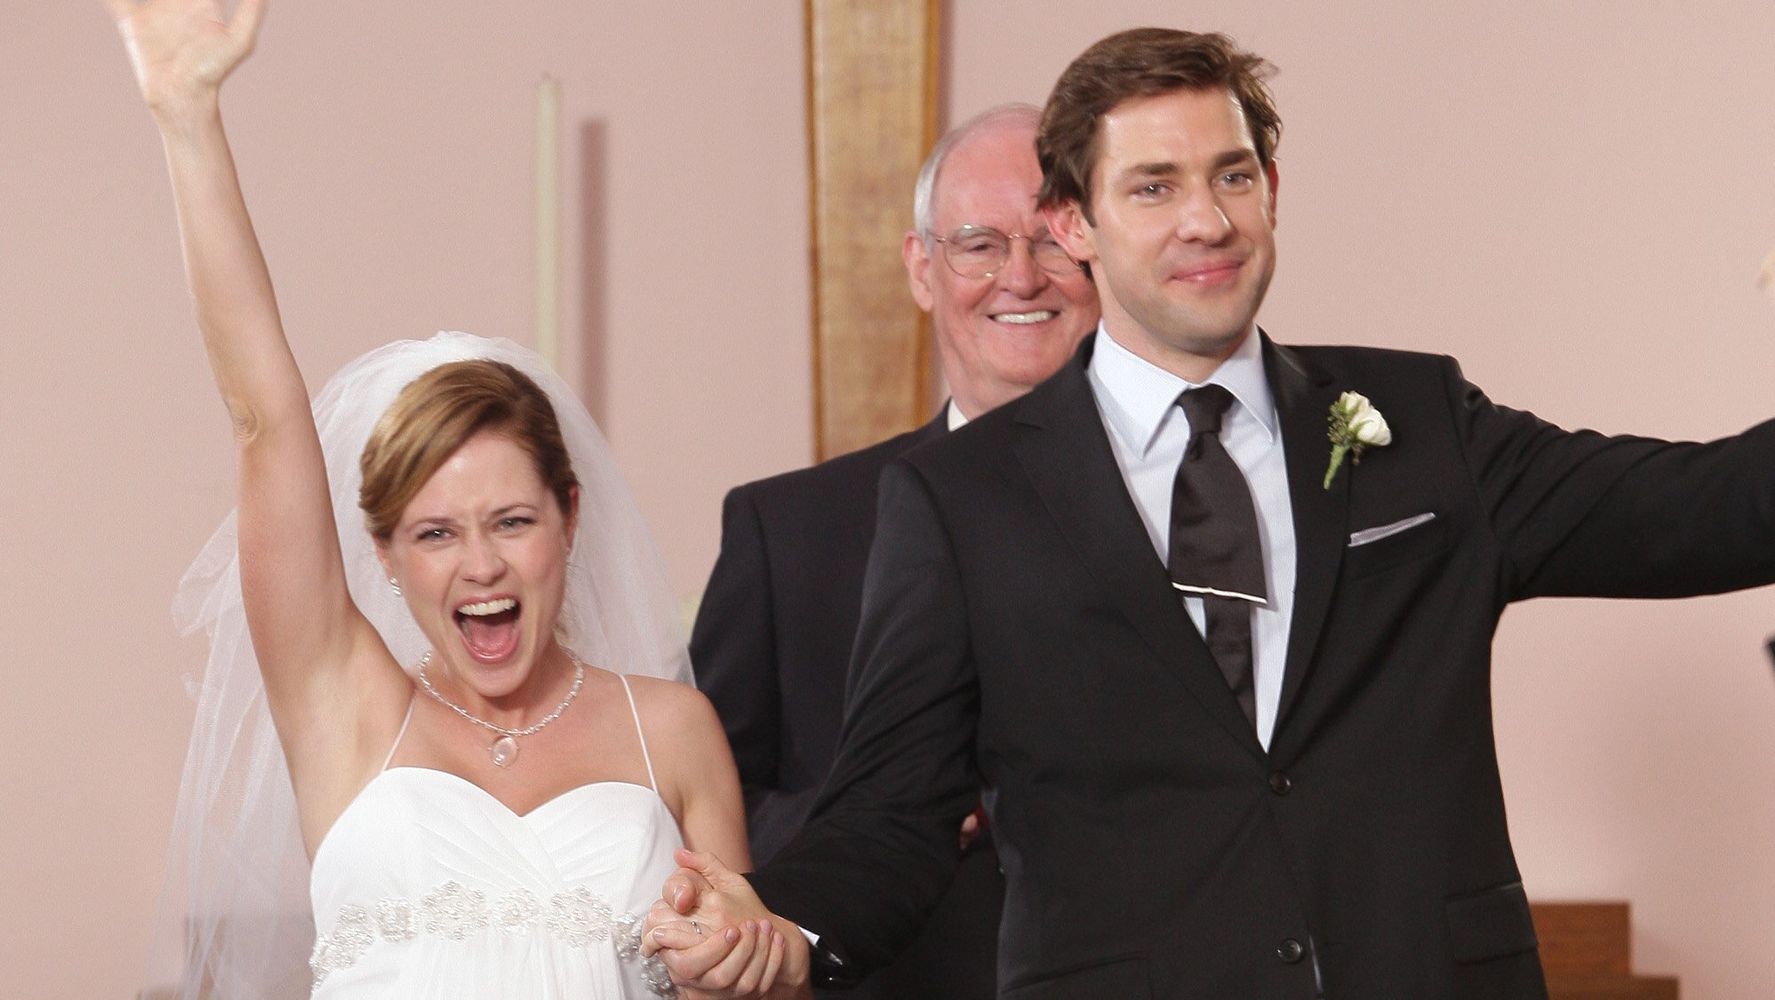 Jim And Pam’s Wedding On 'The Office' Almost Had A Morbid Horse D...